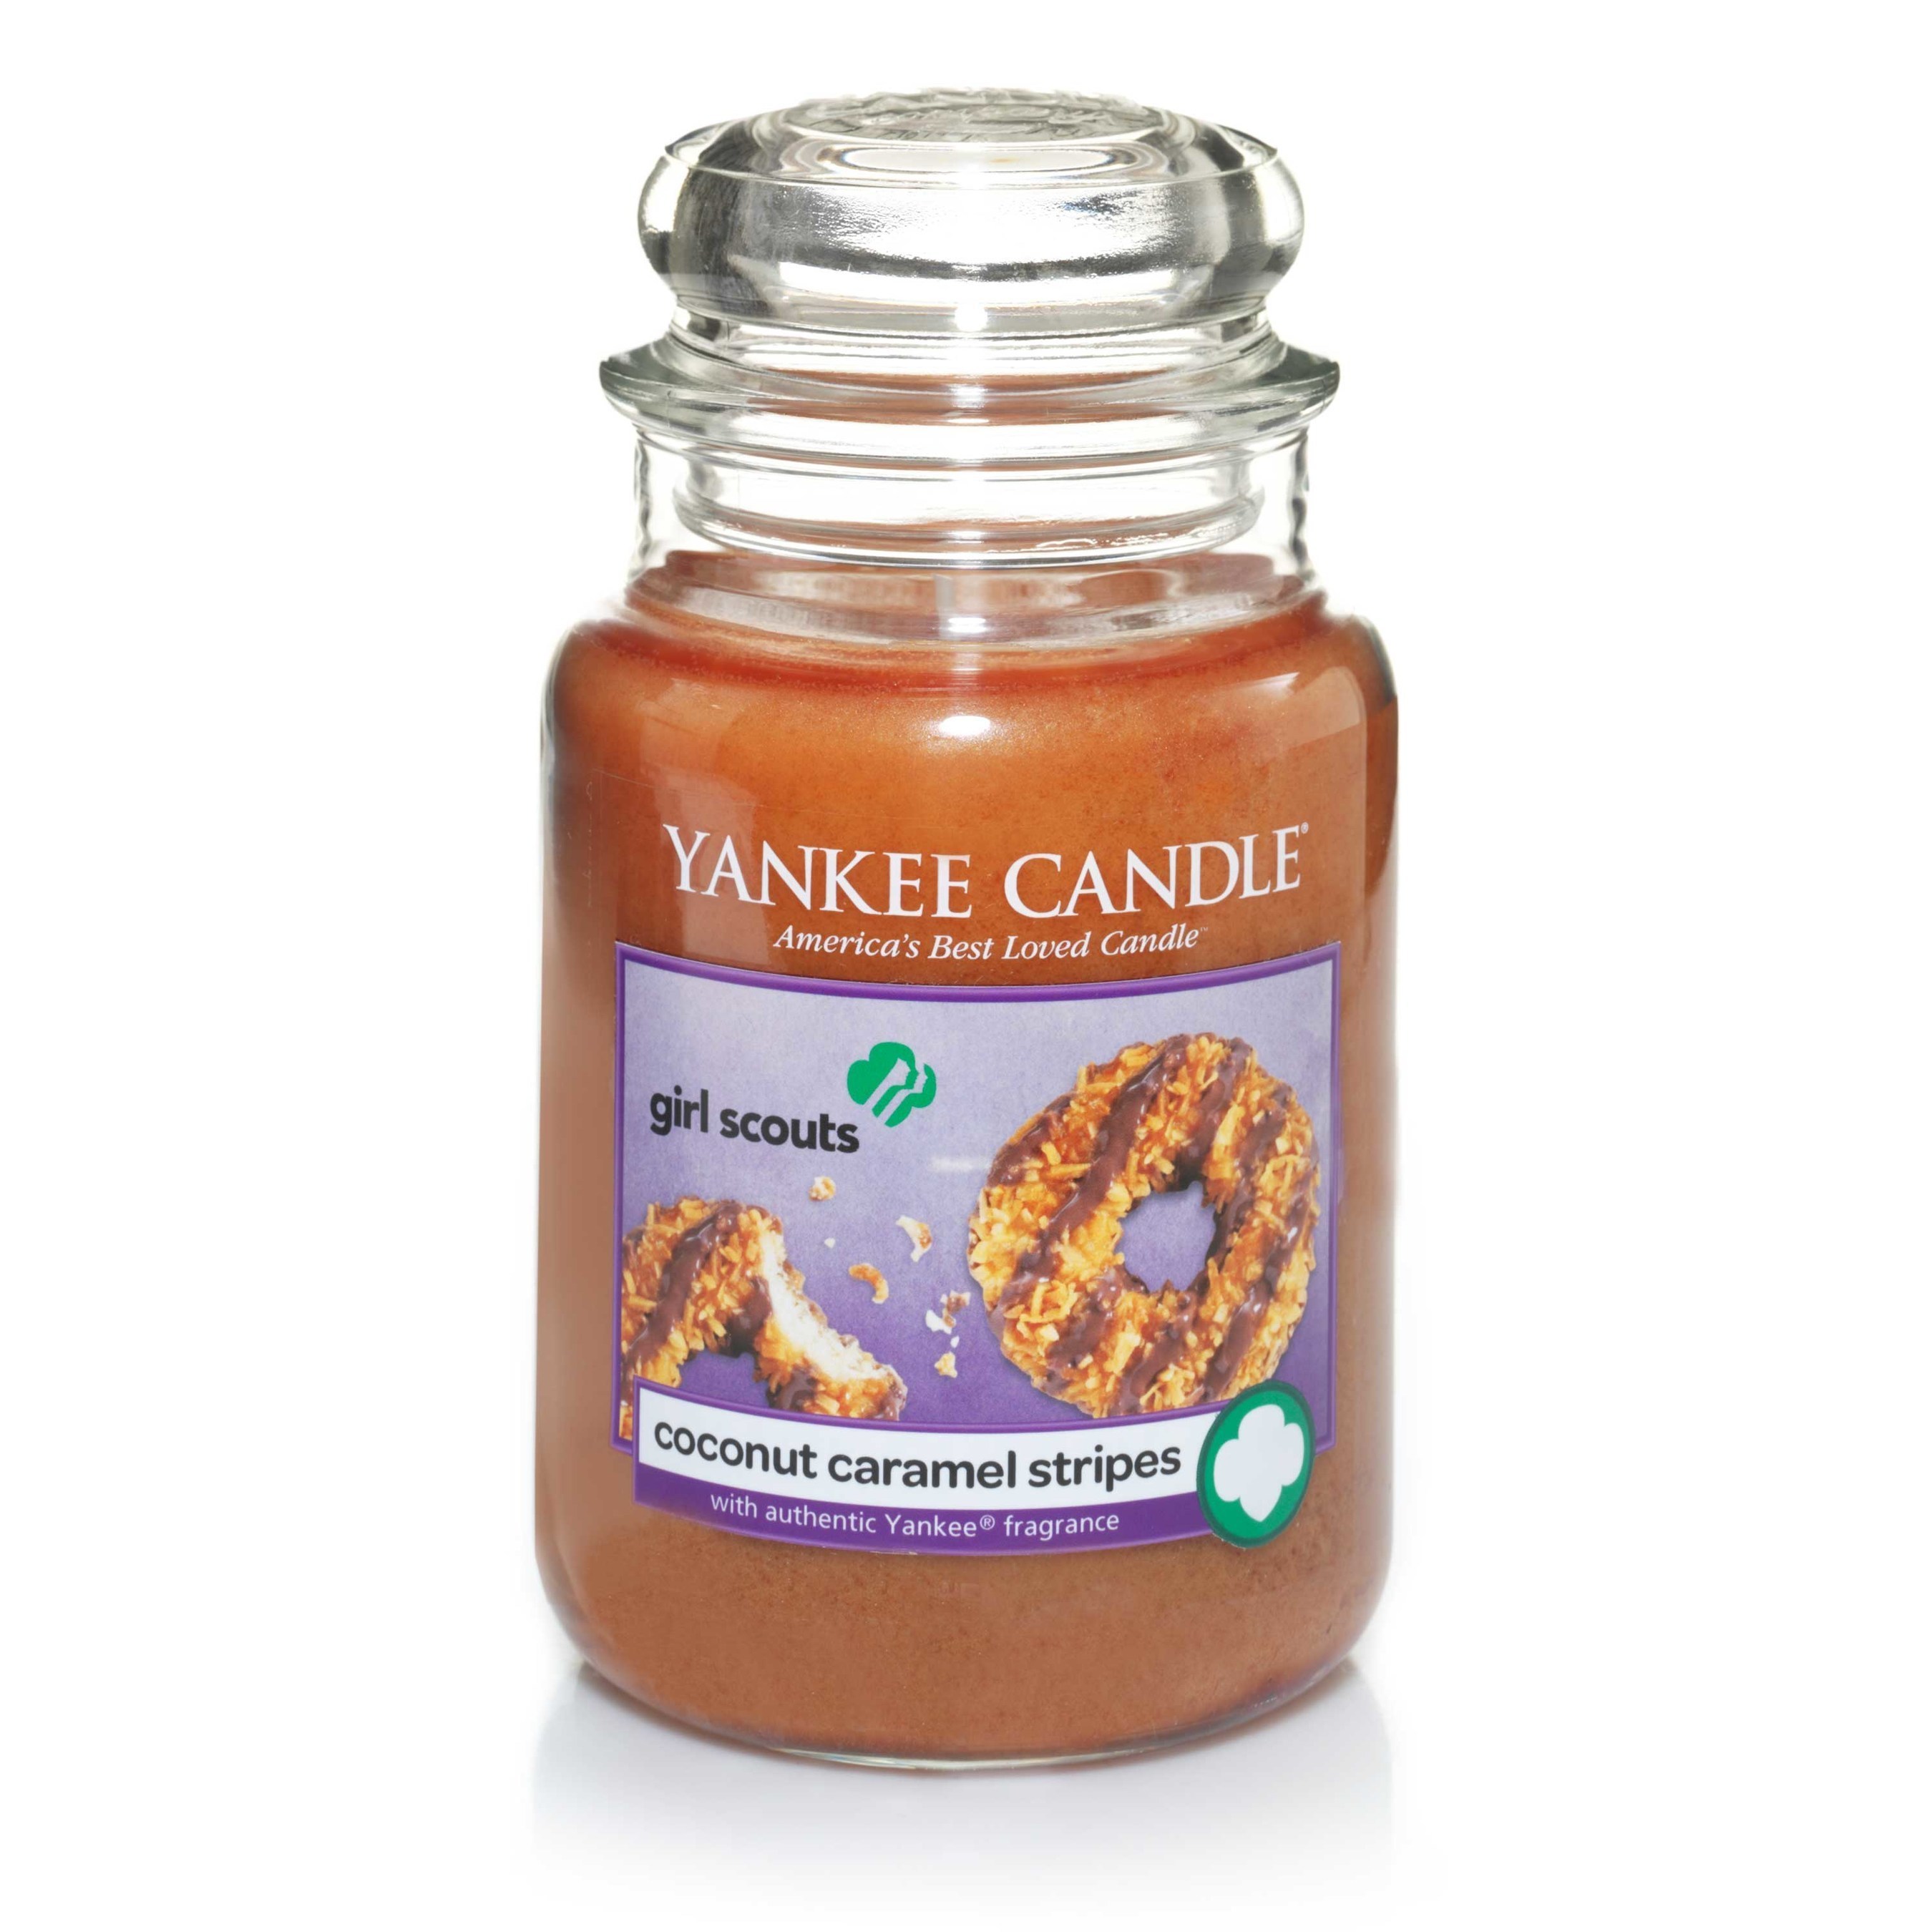 Coconut Caramel Stripes is one of the four new fragrances in Yankee Candle's Girl Scout Cookies Limited Edition Candle Collection.